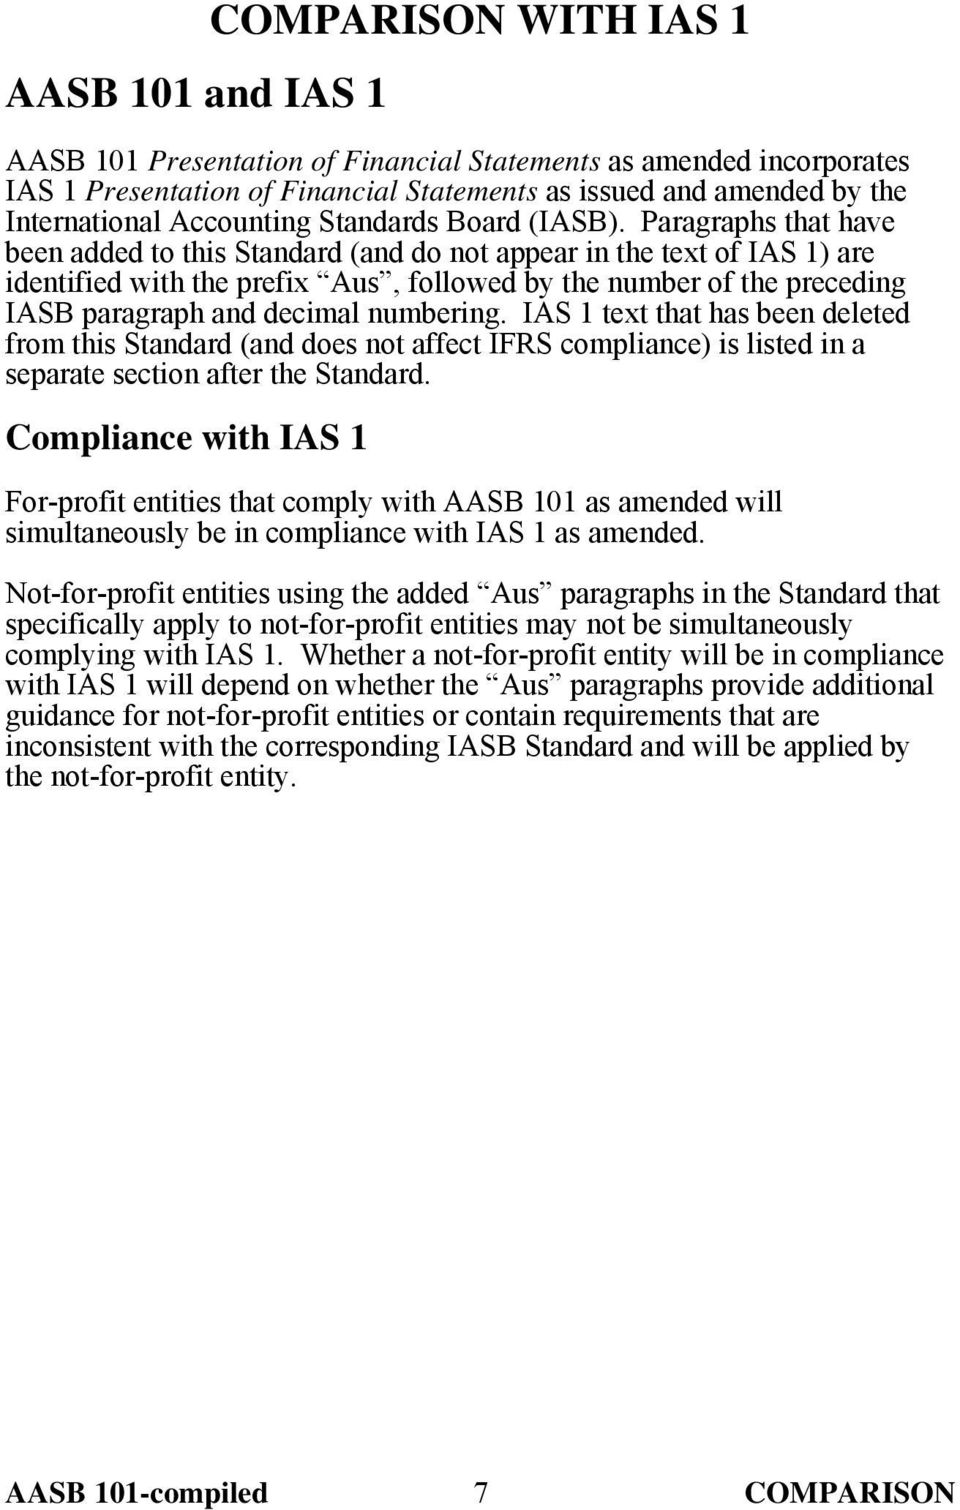 Paragraphs that have been added to this Standard (and do not appear in the text of IAS 1) are identified with the prefix Aus, followed by the number of the preceding IASB paragraph and decimal